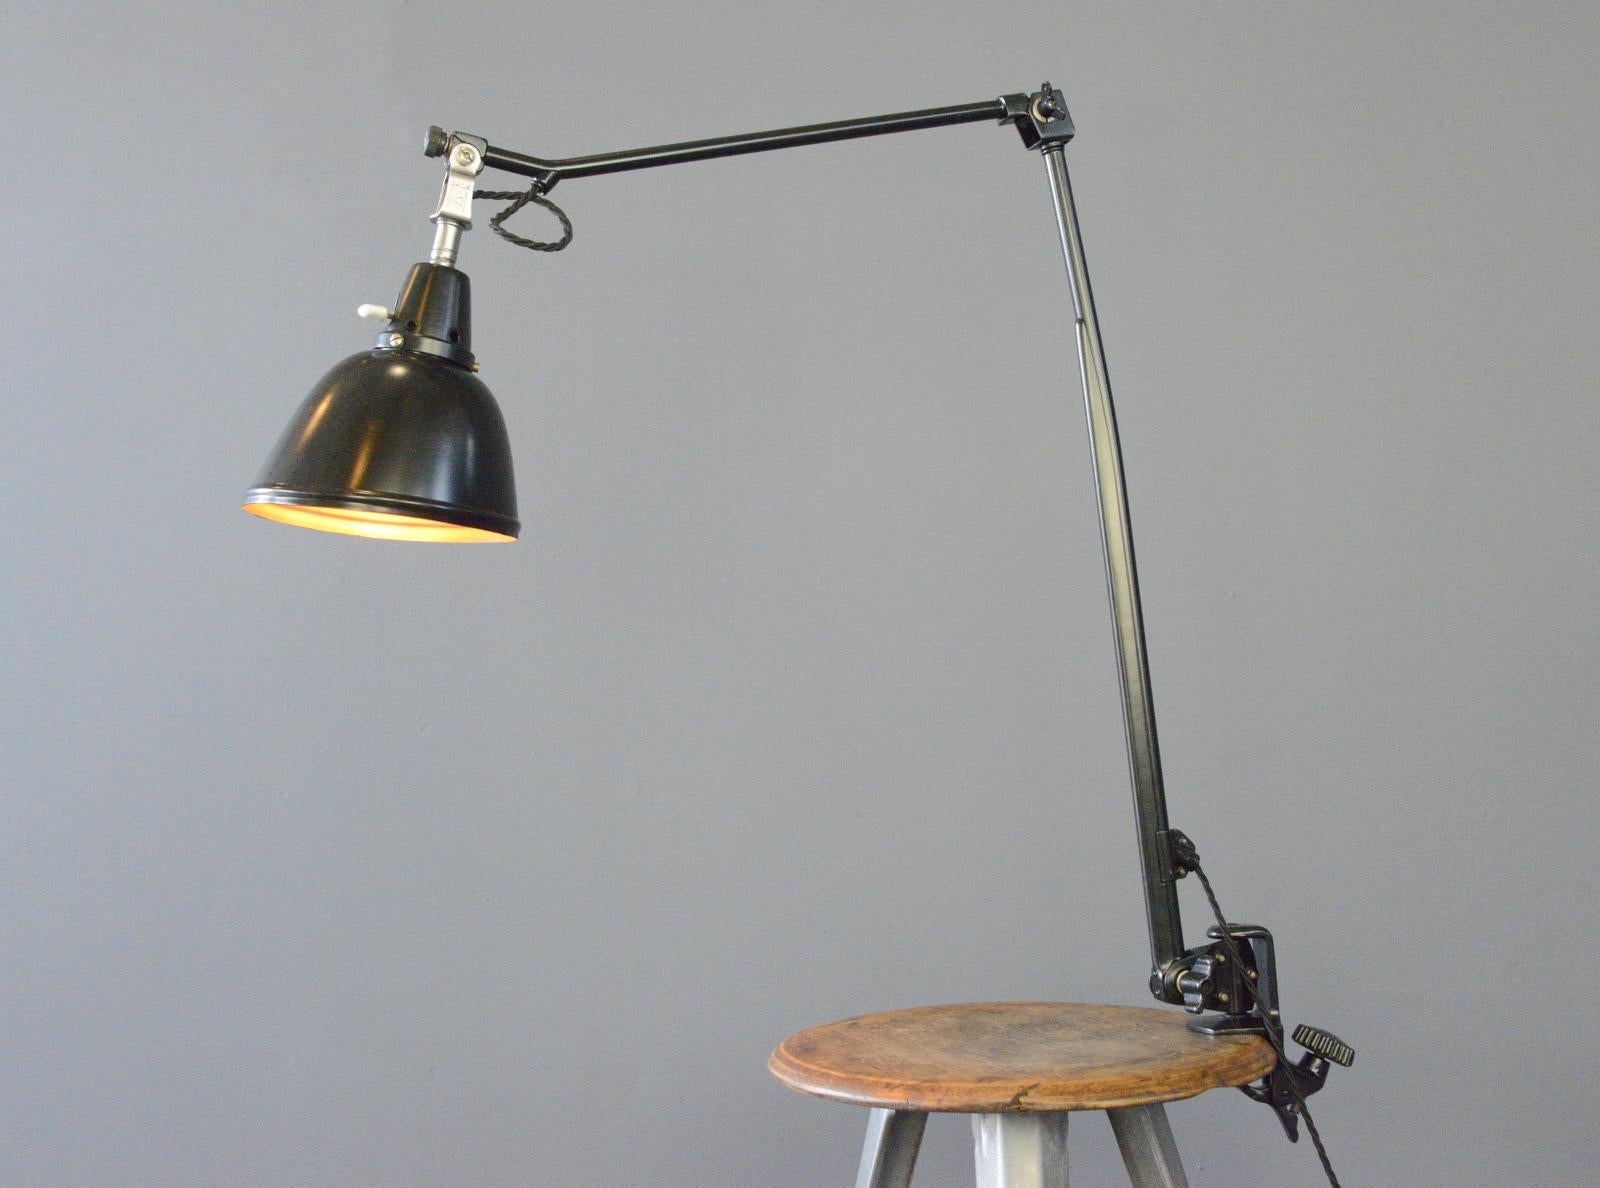 Midgard Typ 114 Table Lamp By Curt Fischer Circa 1930s

- Fully articulated
- Clamp on with original Bakelite knob
- Aluminium shade
- Takes E27 fitting bulbs
- On/Off toggle switch on the head of the lamp
- Designed by Curt Fischer 
- German ~